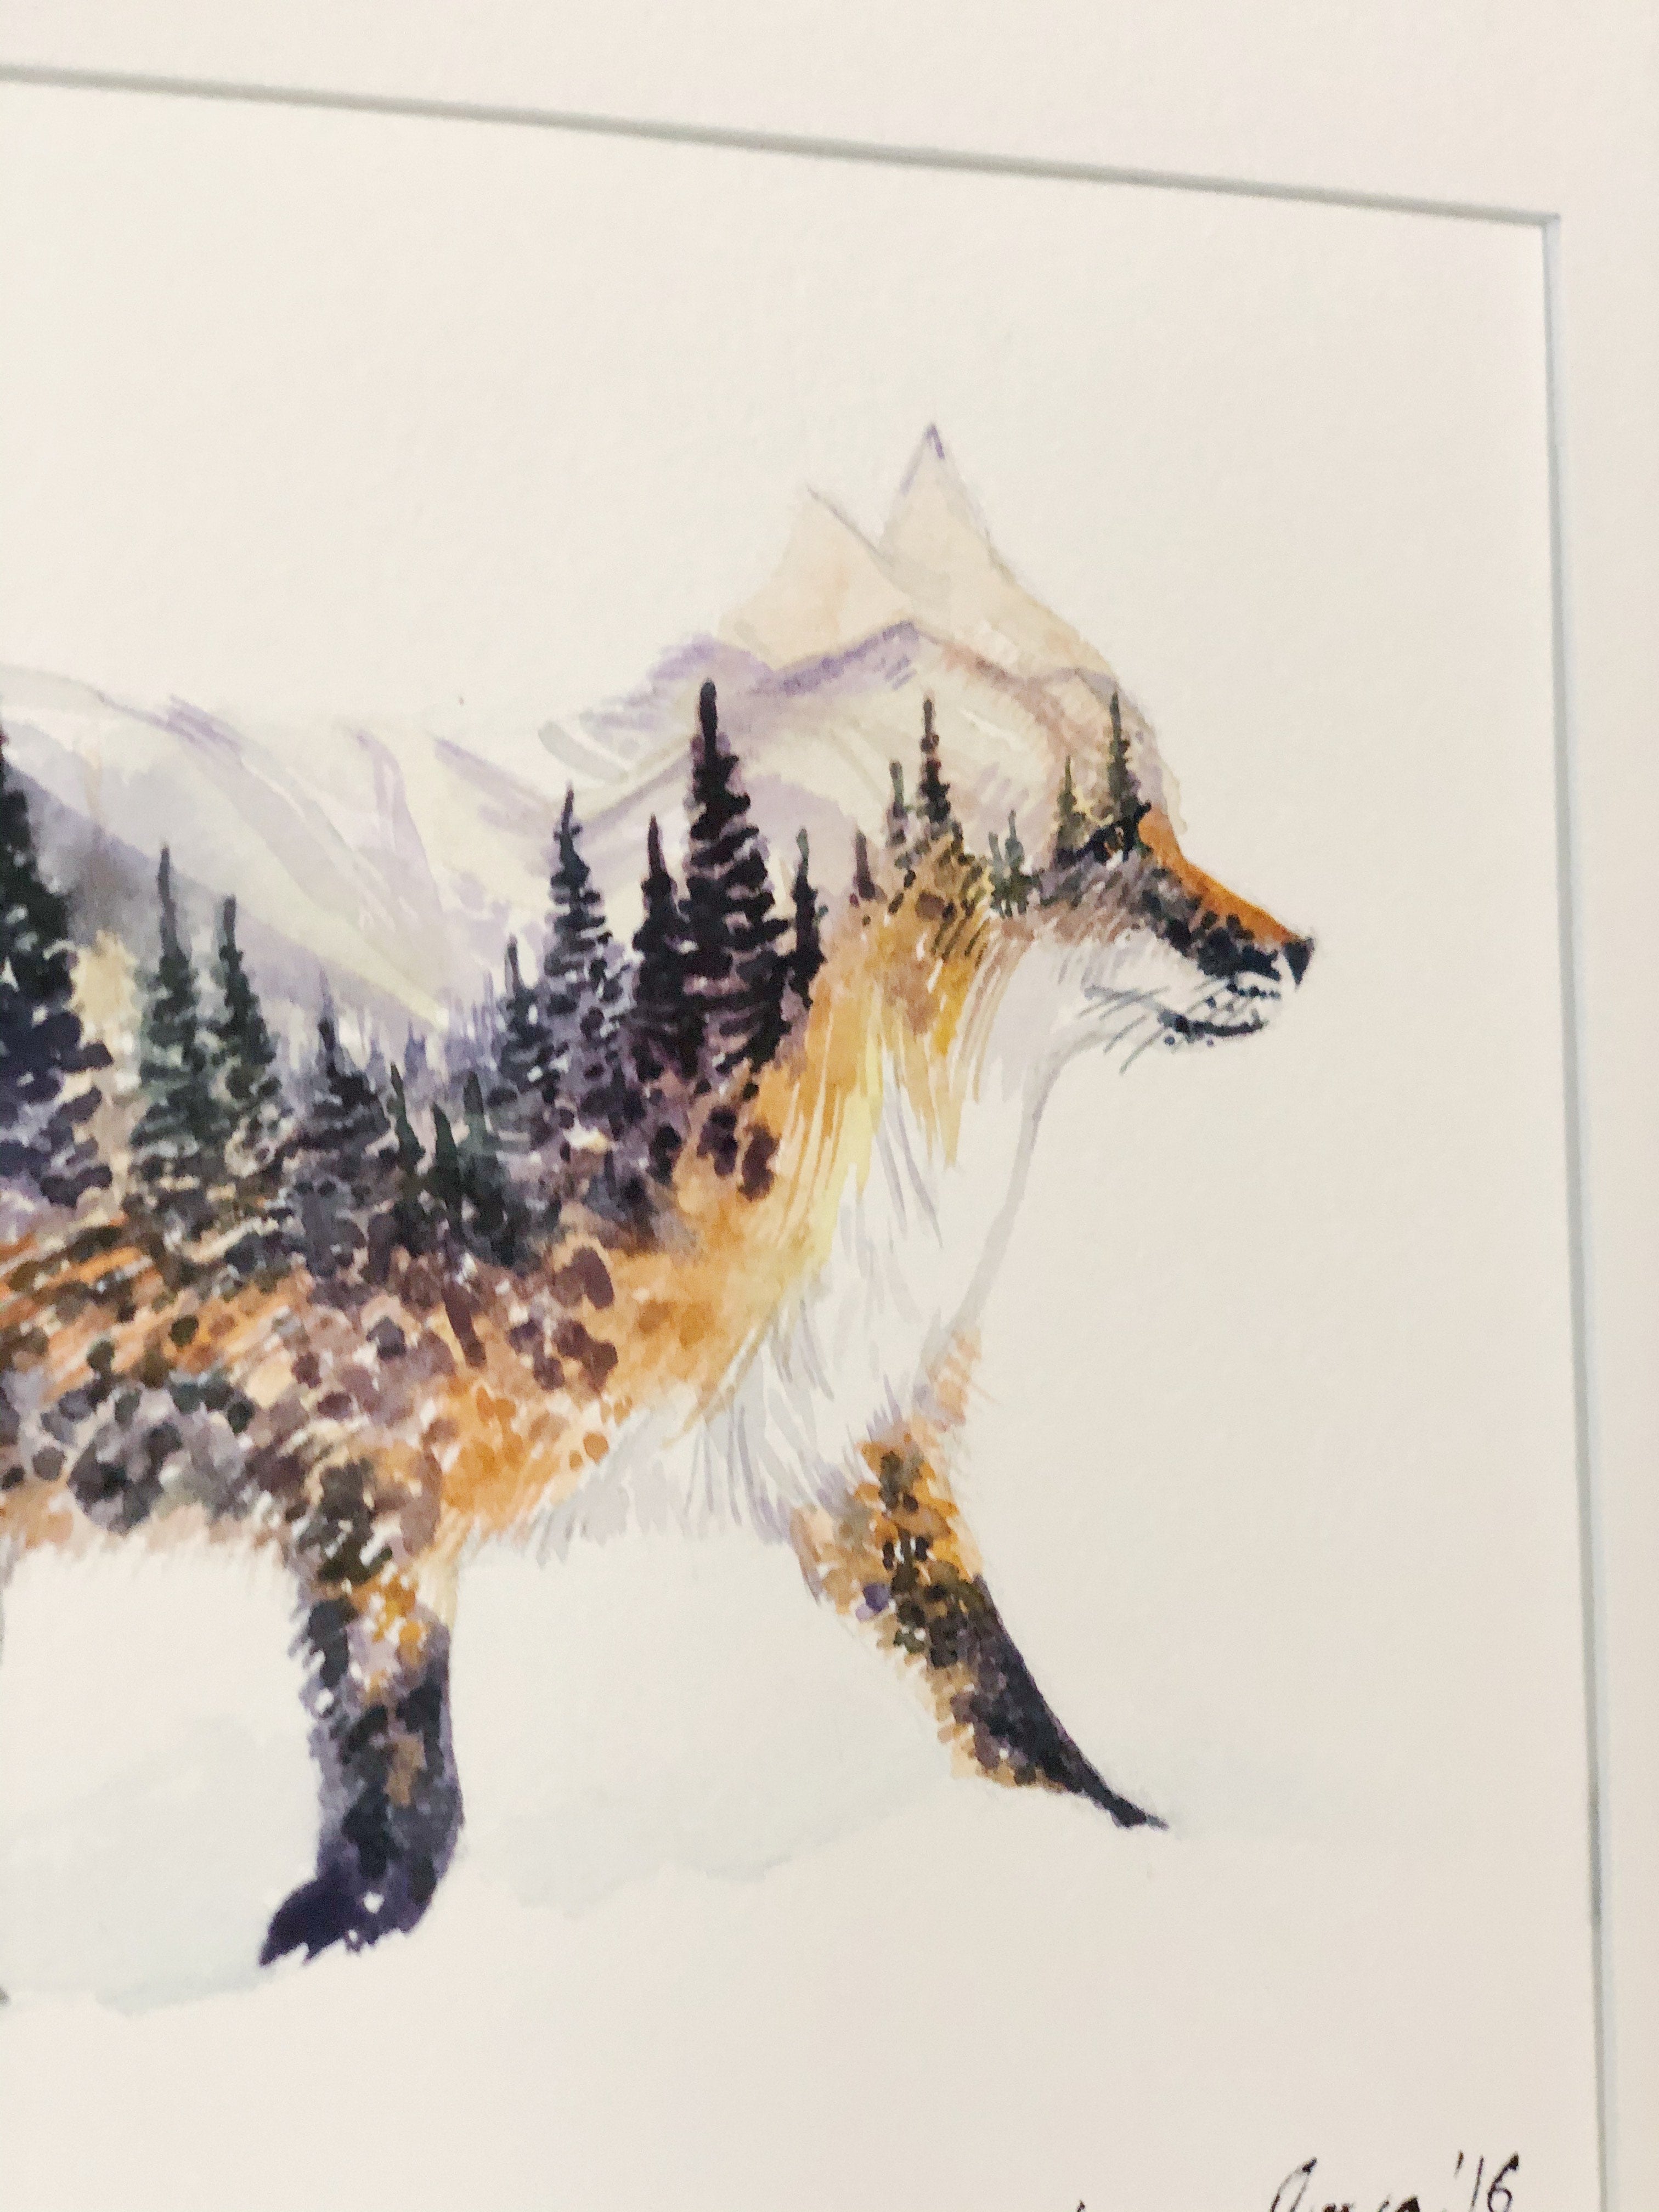 "The Little Fox" Double Exposure Mountains and Forest Original Watercolour Painting